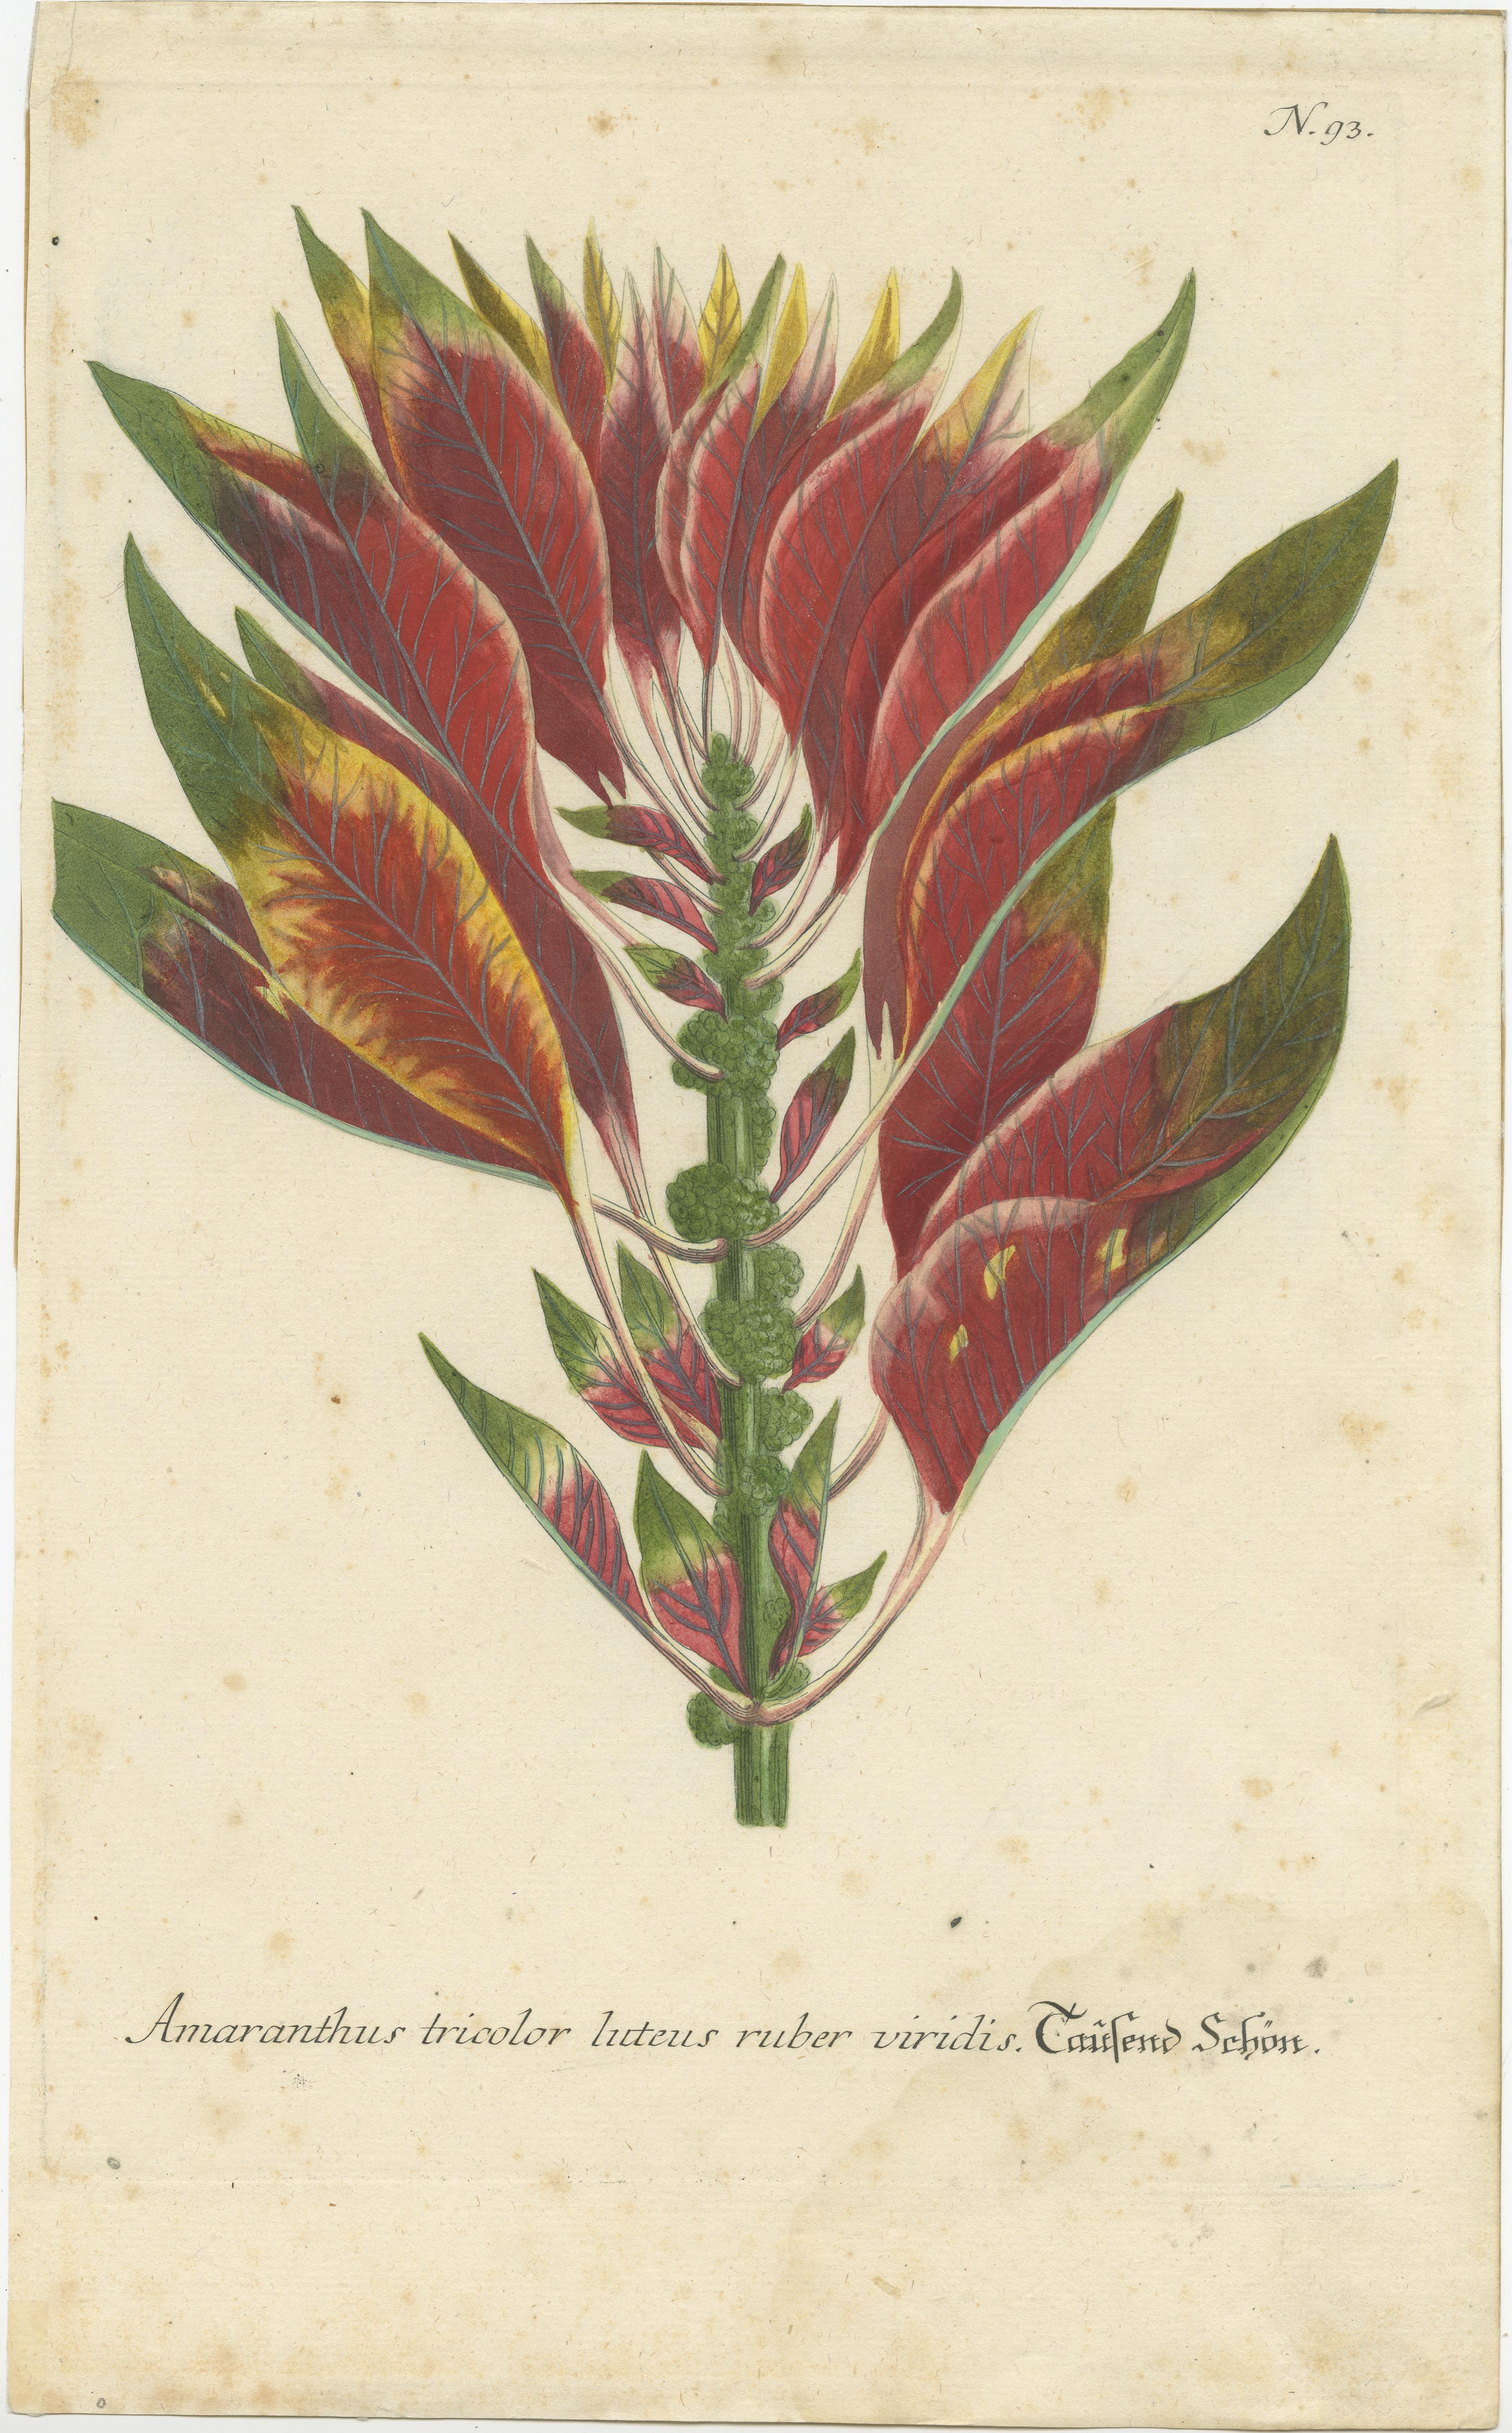 Antique print titled 'Amaranthus tricolor (..)'. Hand-finished mezzotint engraving of amaranthus tricolor, known as edible amaranth. This print originates from 'Phytanthoza Iconographia' by Johann Wilhelm Weinmann. Published circa 1740. 

Johann